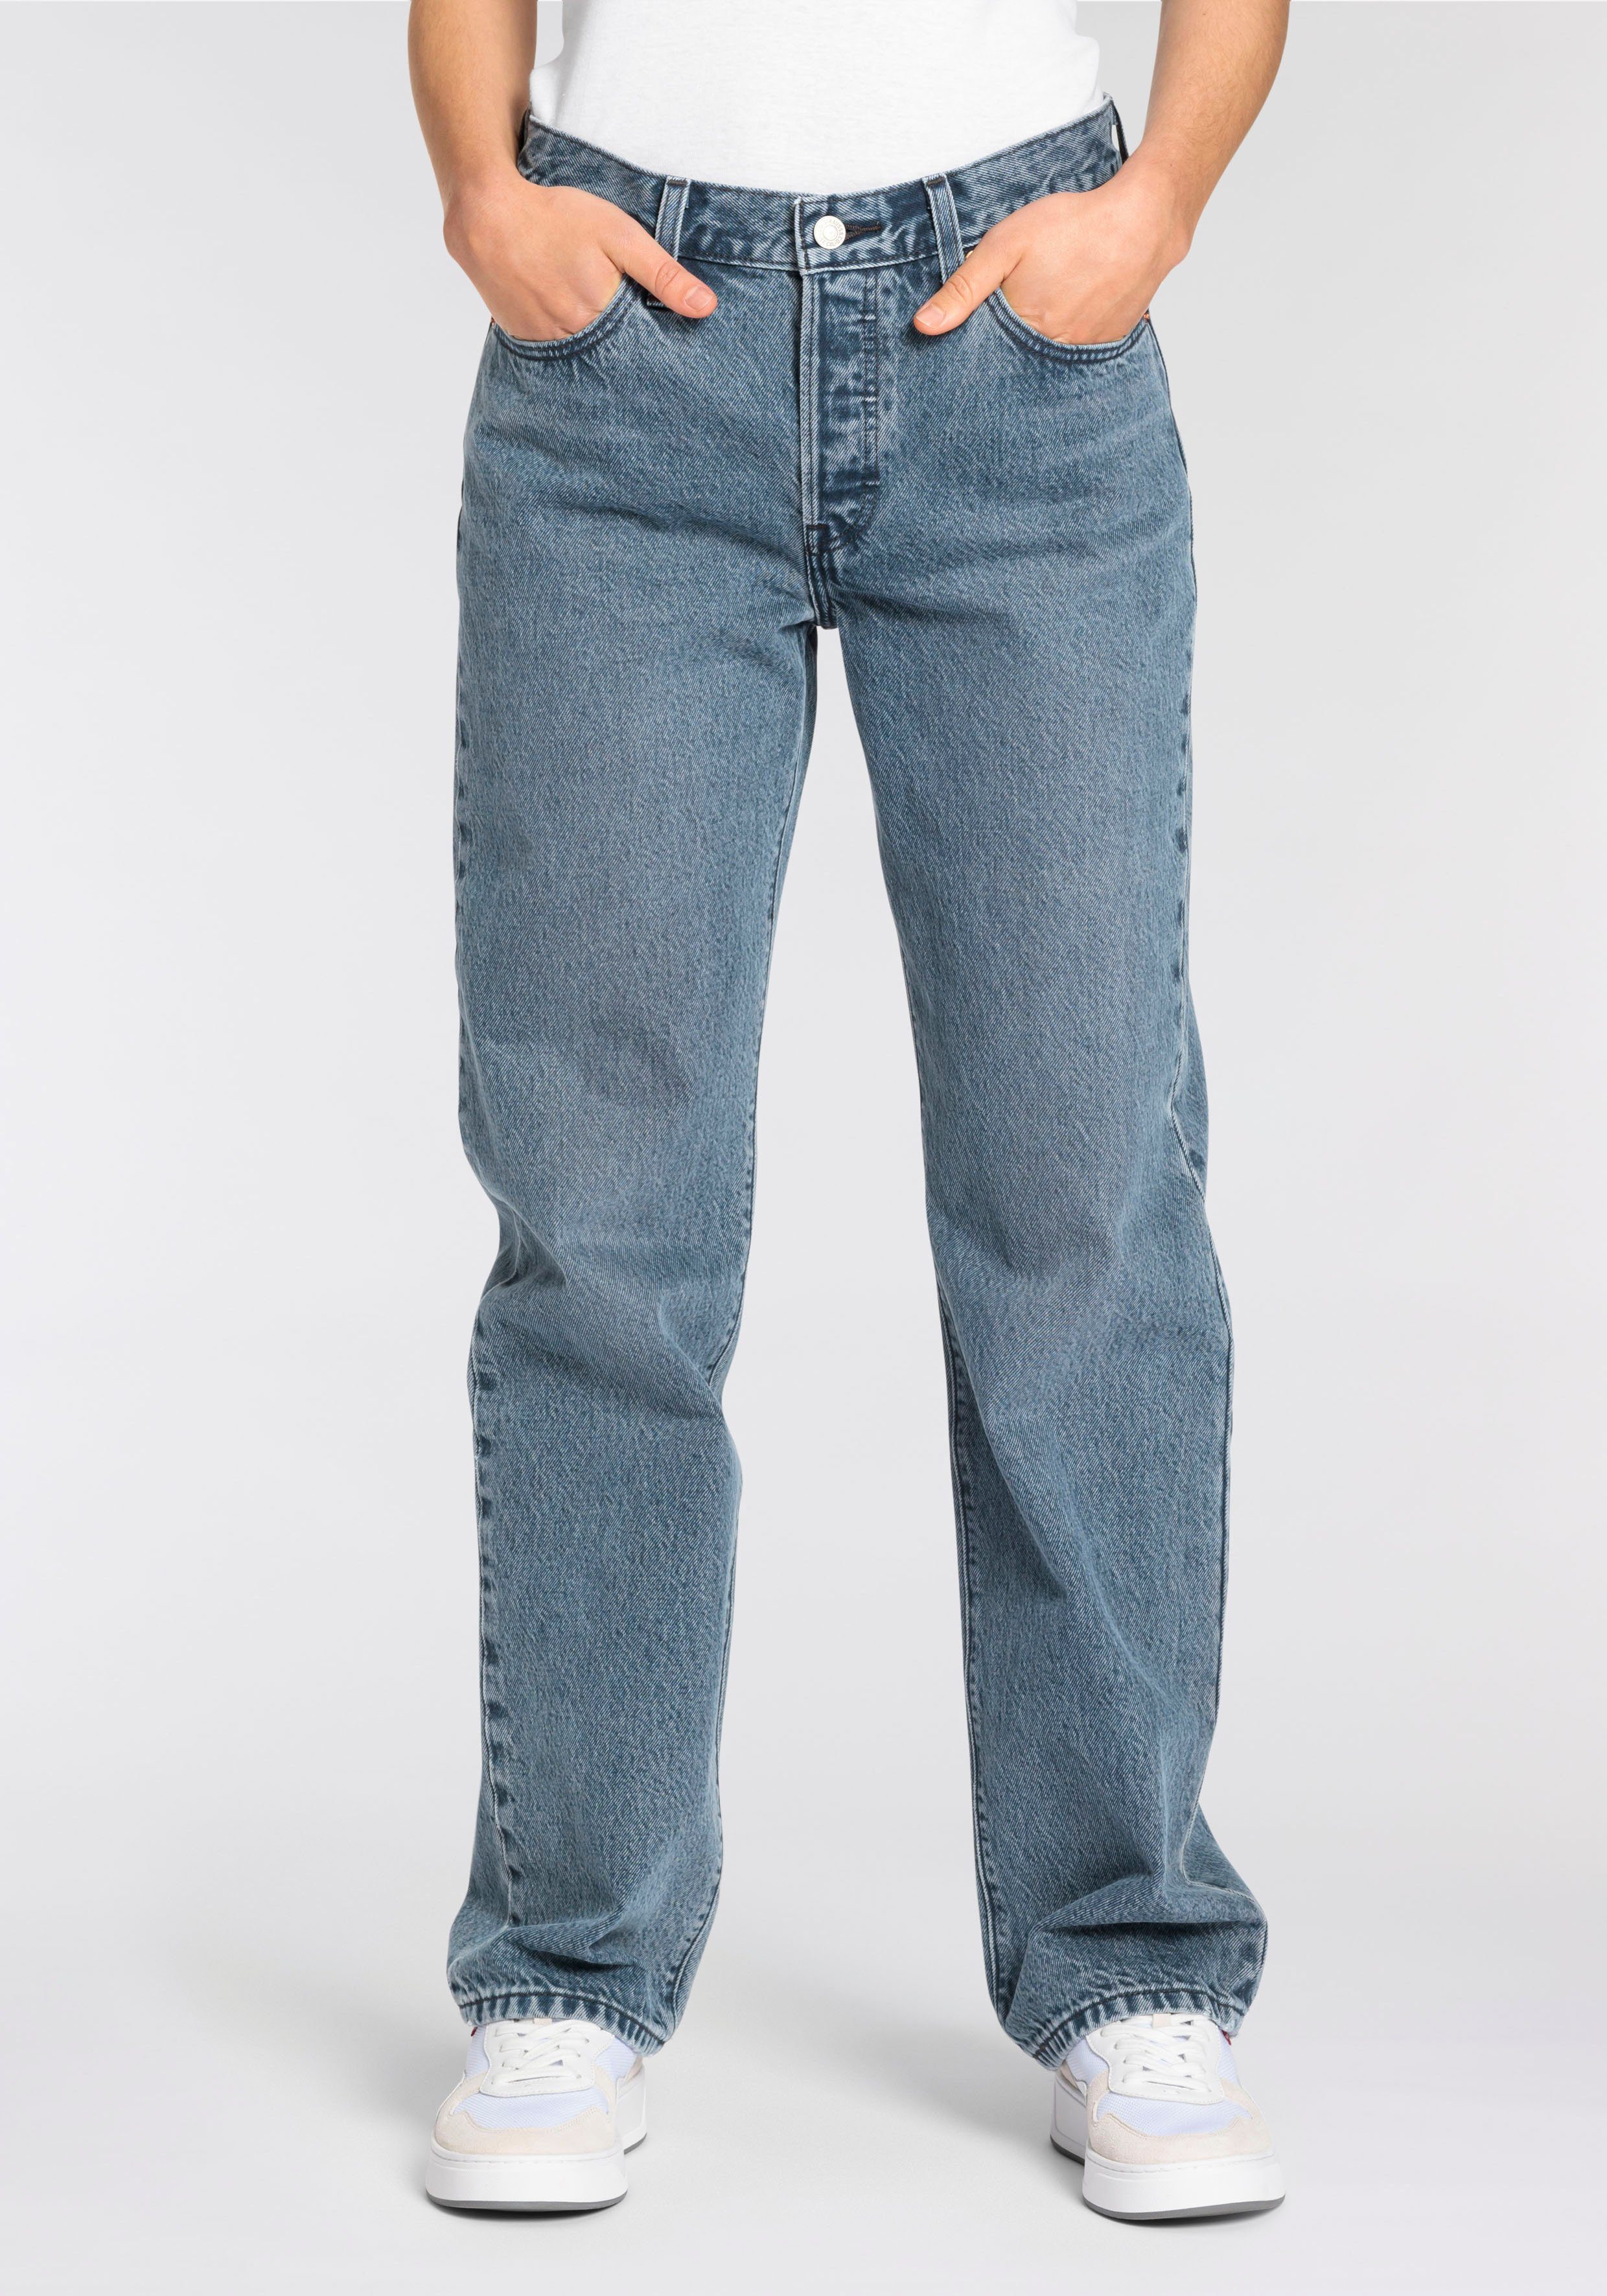 Levi's® Weite Jeans 90'S 501 501 Collection